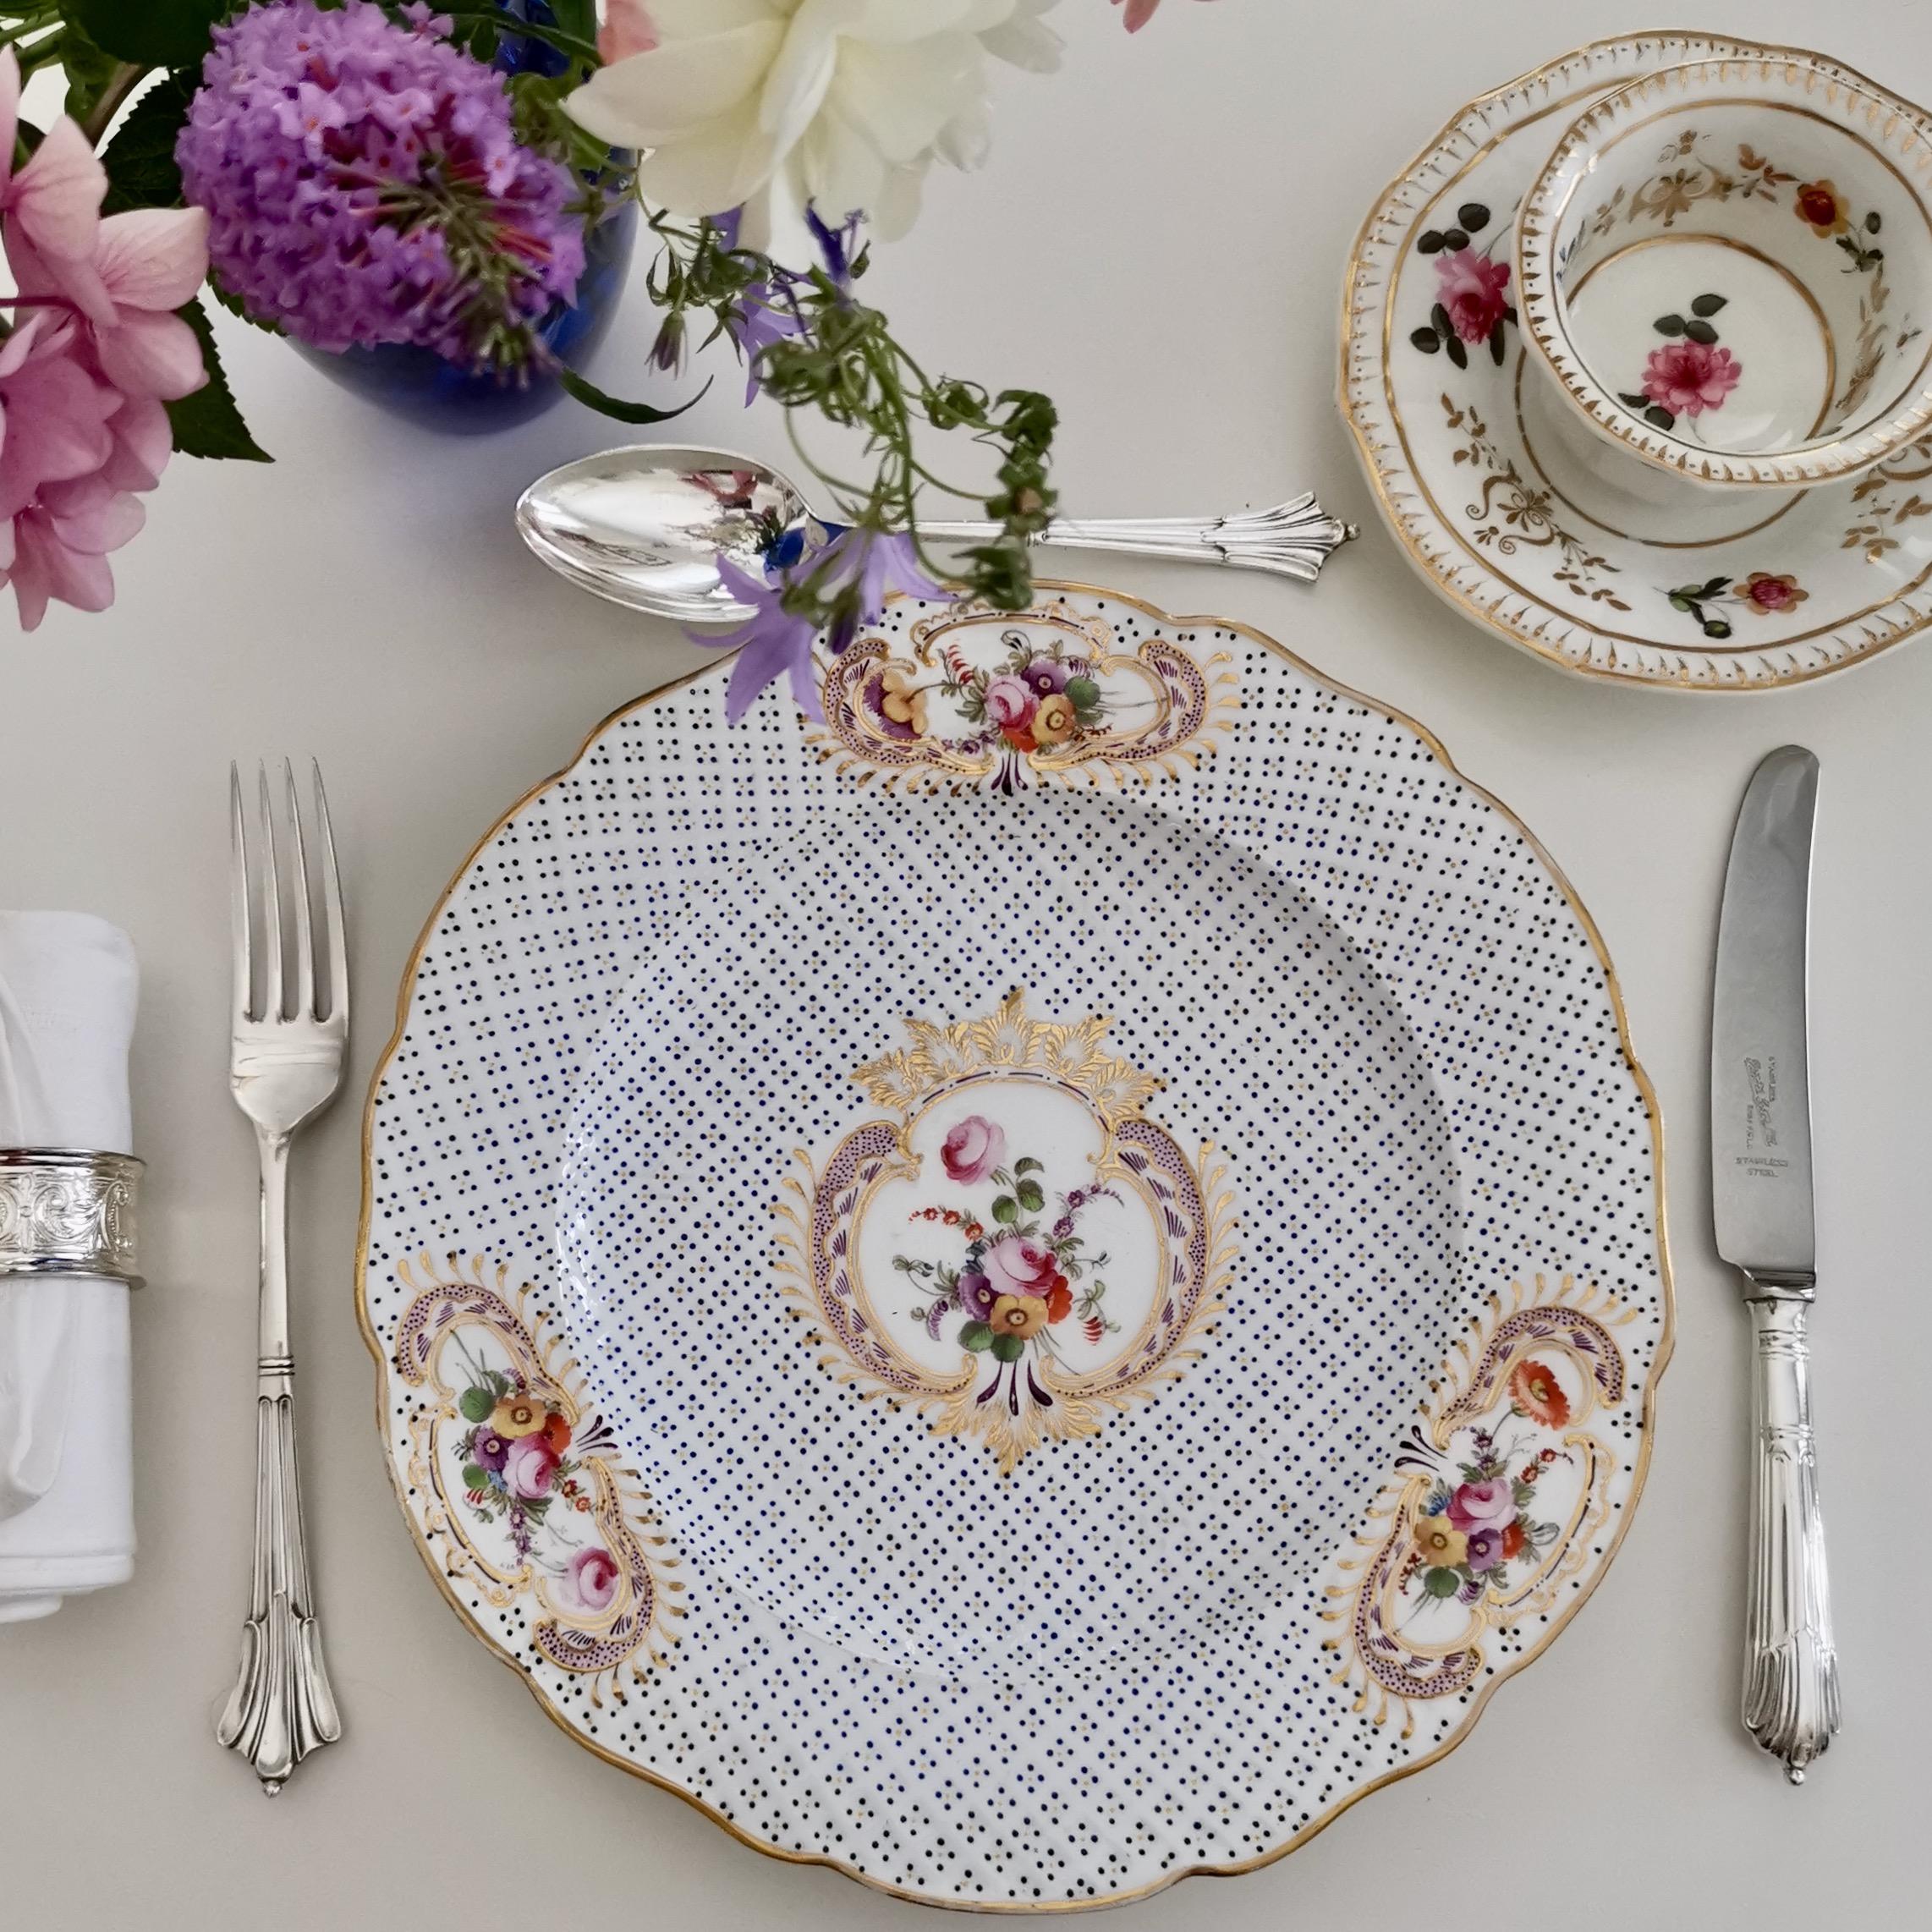 This is a wonderful Coalport dinner plate made in circa 1820, which is known as the Regency period. The plate has moulding all-over the surface, as well as gilded reserves with beautiful hand painted flowers.

Coalport was one of the leading